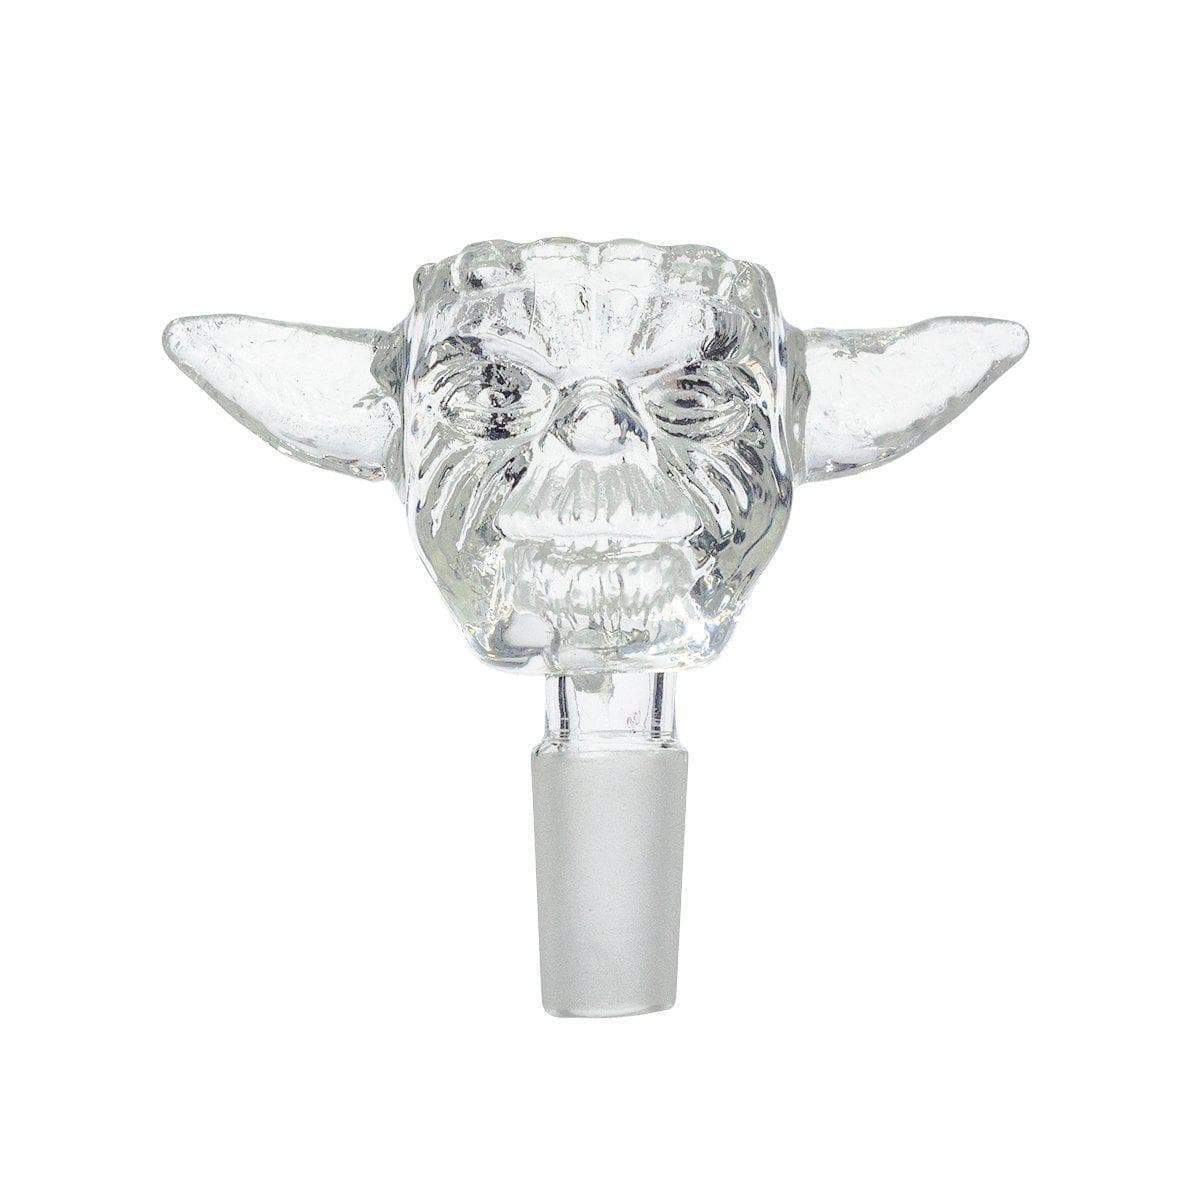 14mm clear glass bowl Star Wars male joint bong smoking accessory bowl sculpted face Jedi master Yoda big ears finger grips